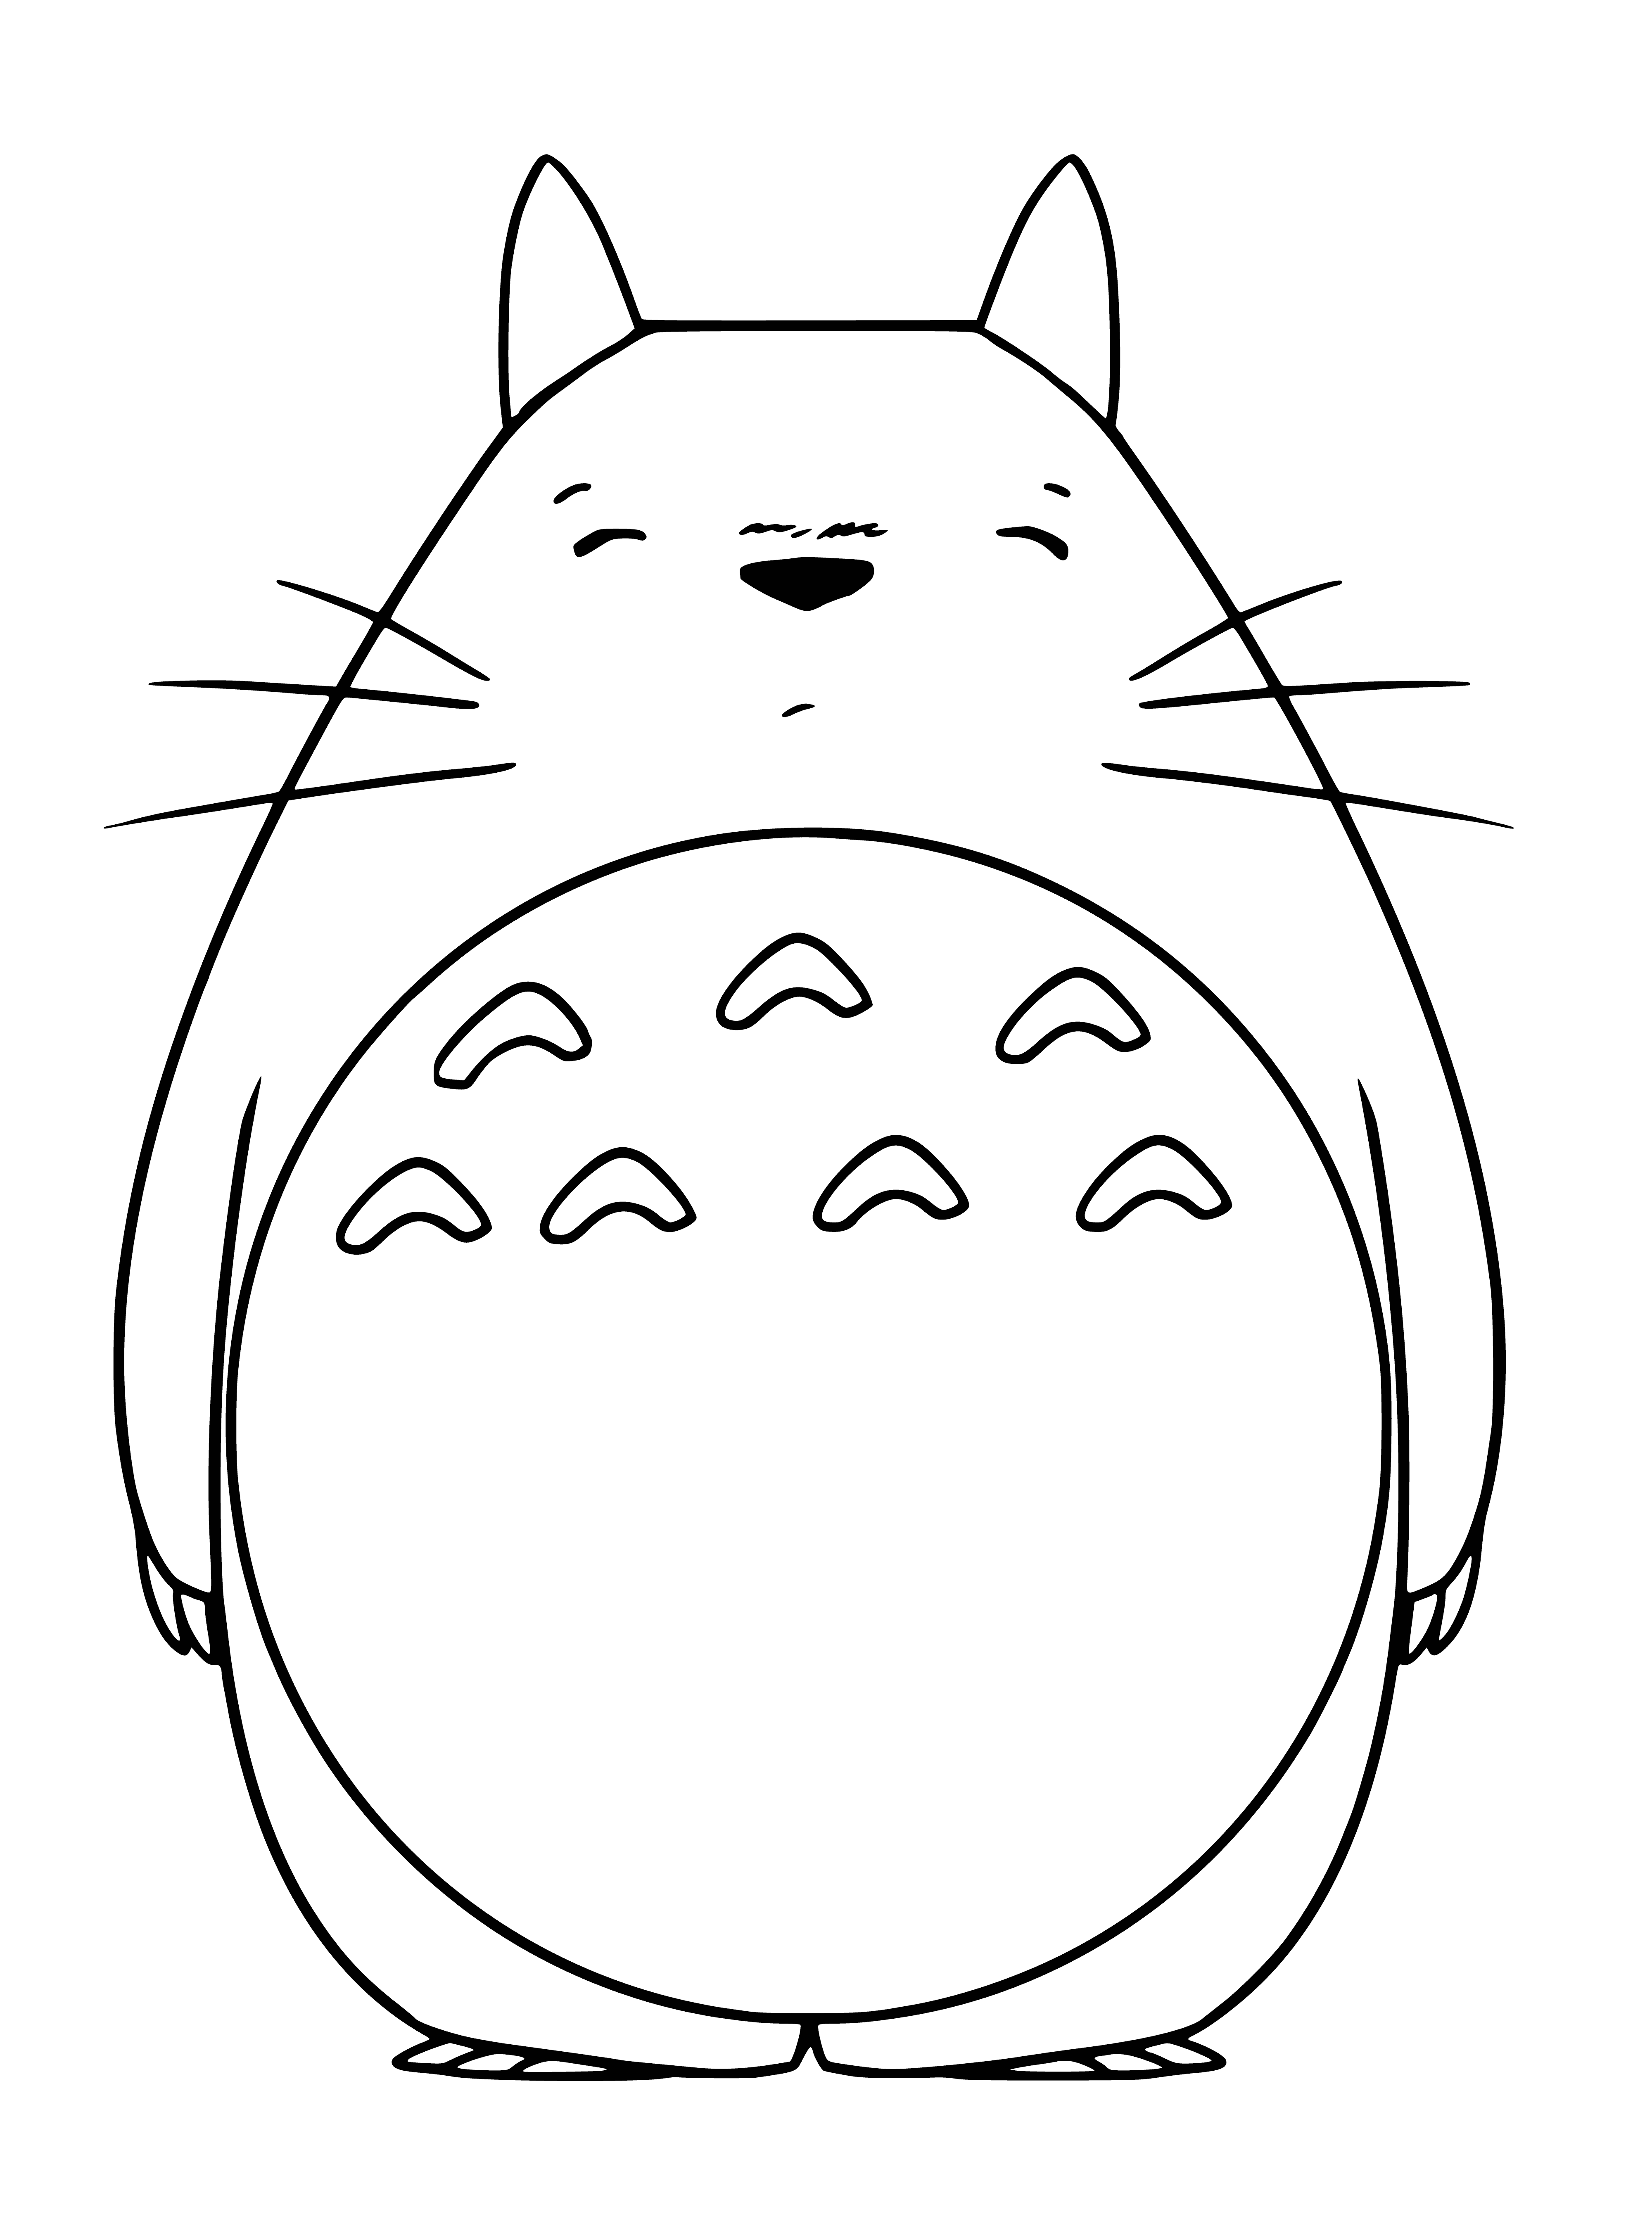 Forest Spirit Totoro coloring page